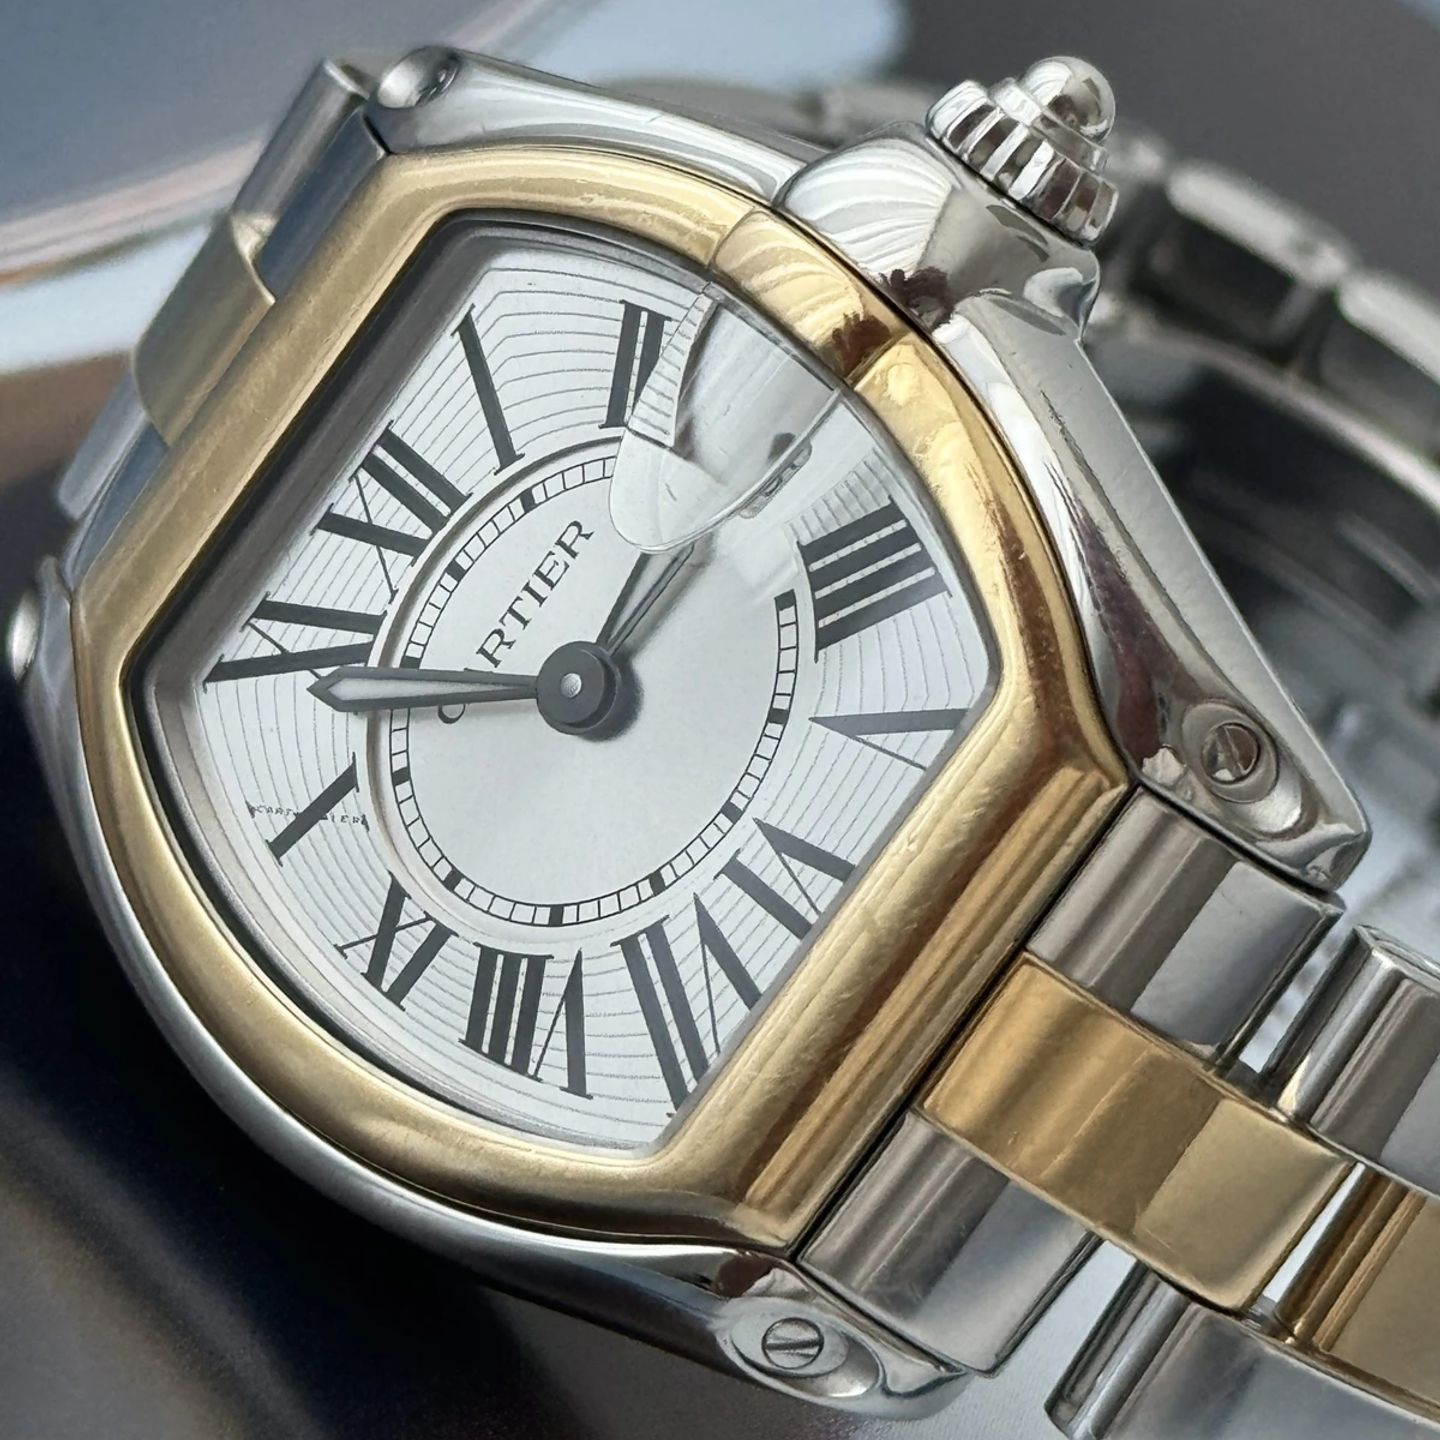 Cartier Roadster 2675 (2008) - White dial 31 mm Gold/Steel case (1/5)